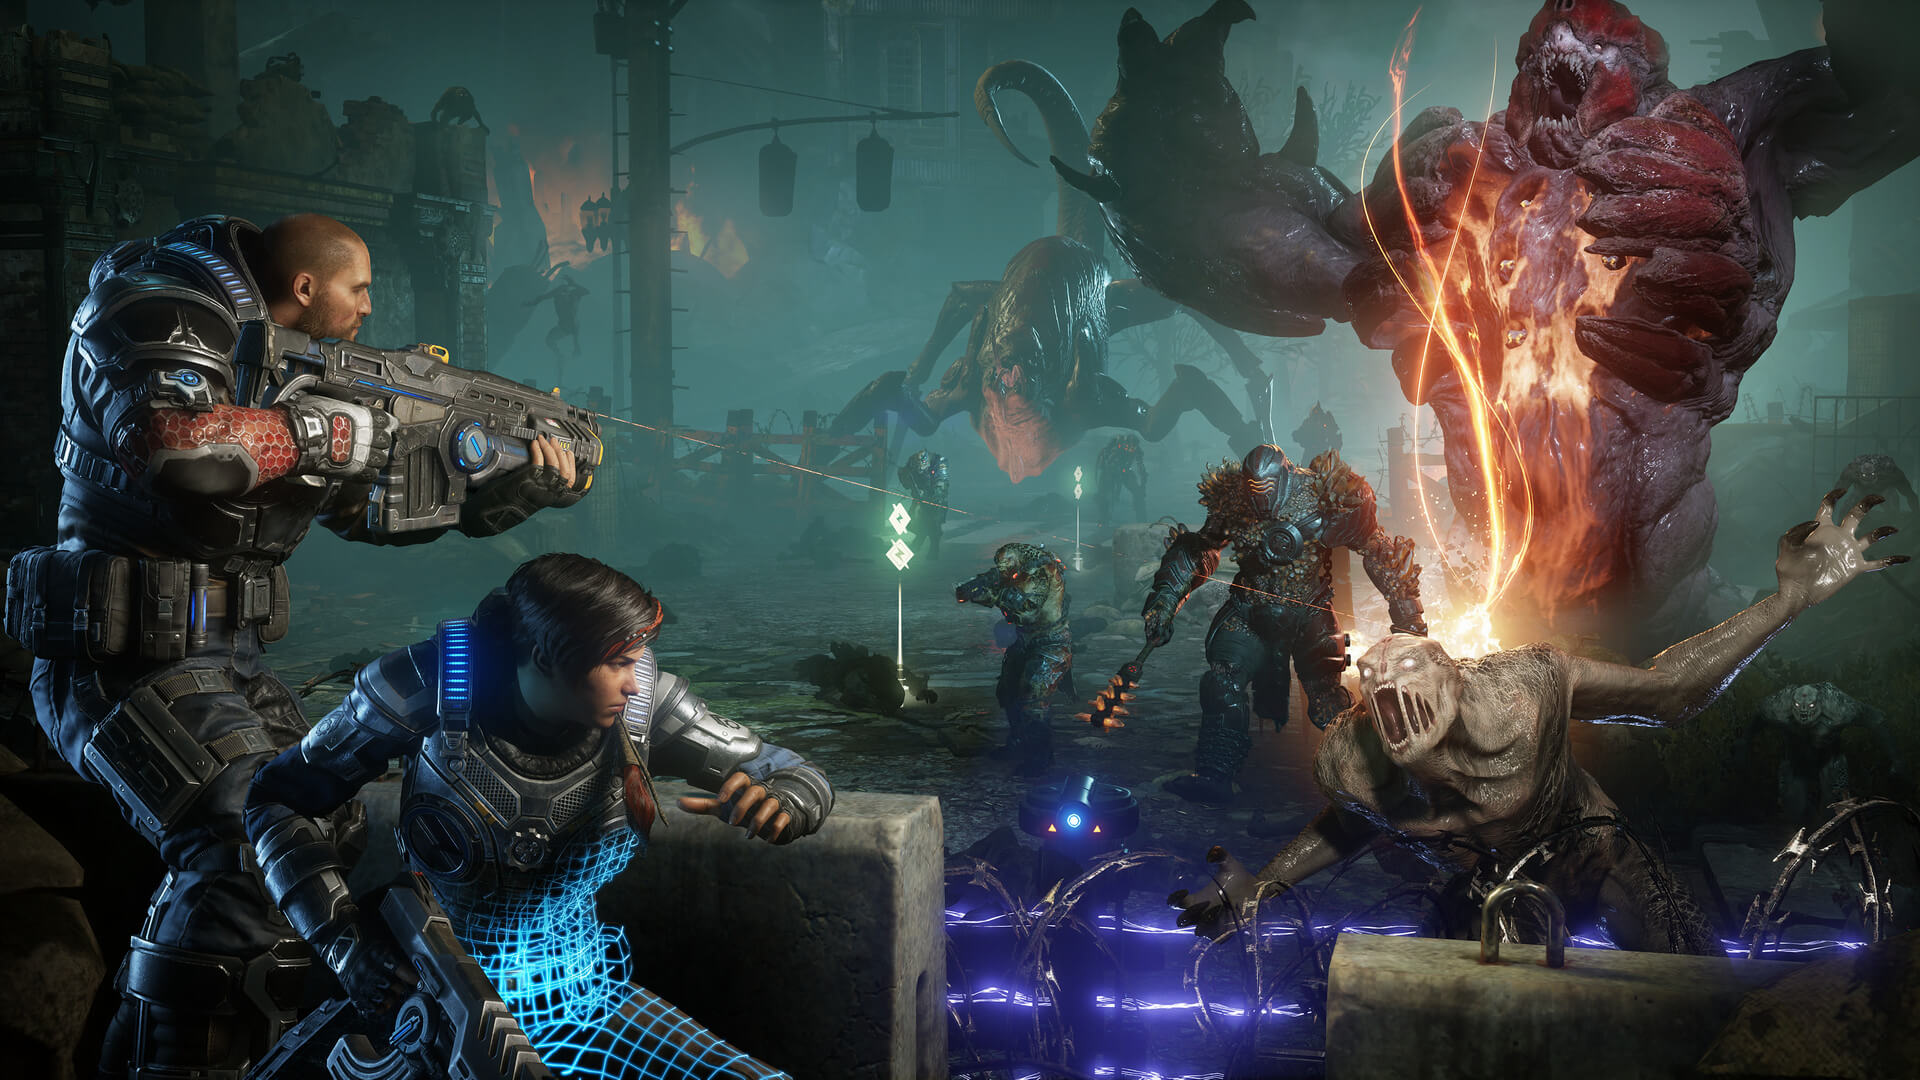 PC players can destroy Xbox One players in Gears of War 4 this weekend